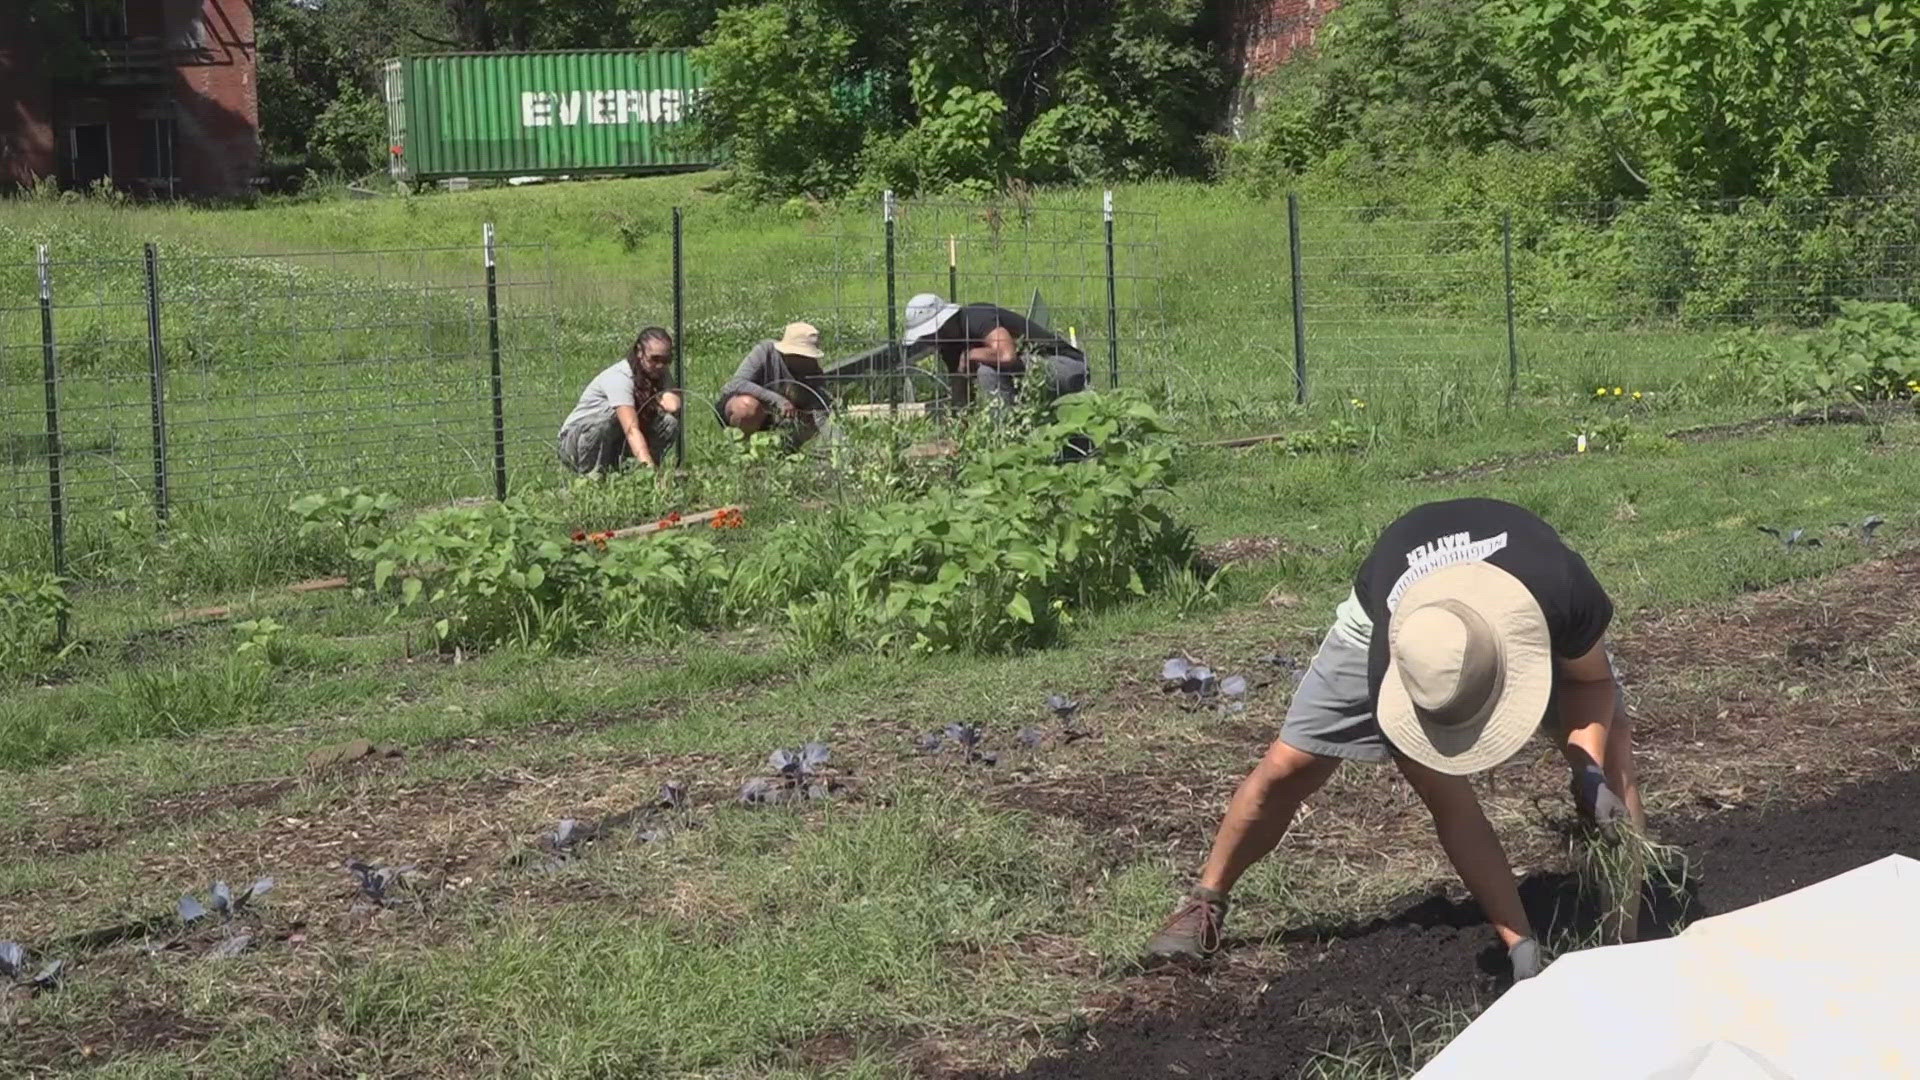 Ujima, founded in 2018, grows and provide fresh food for marginalized communities, combats illegal dumping through neighborhood cleanup efforts, and empowers youth.